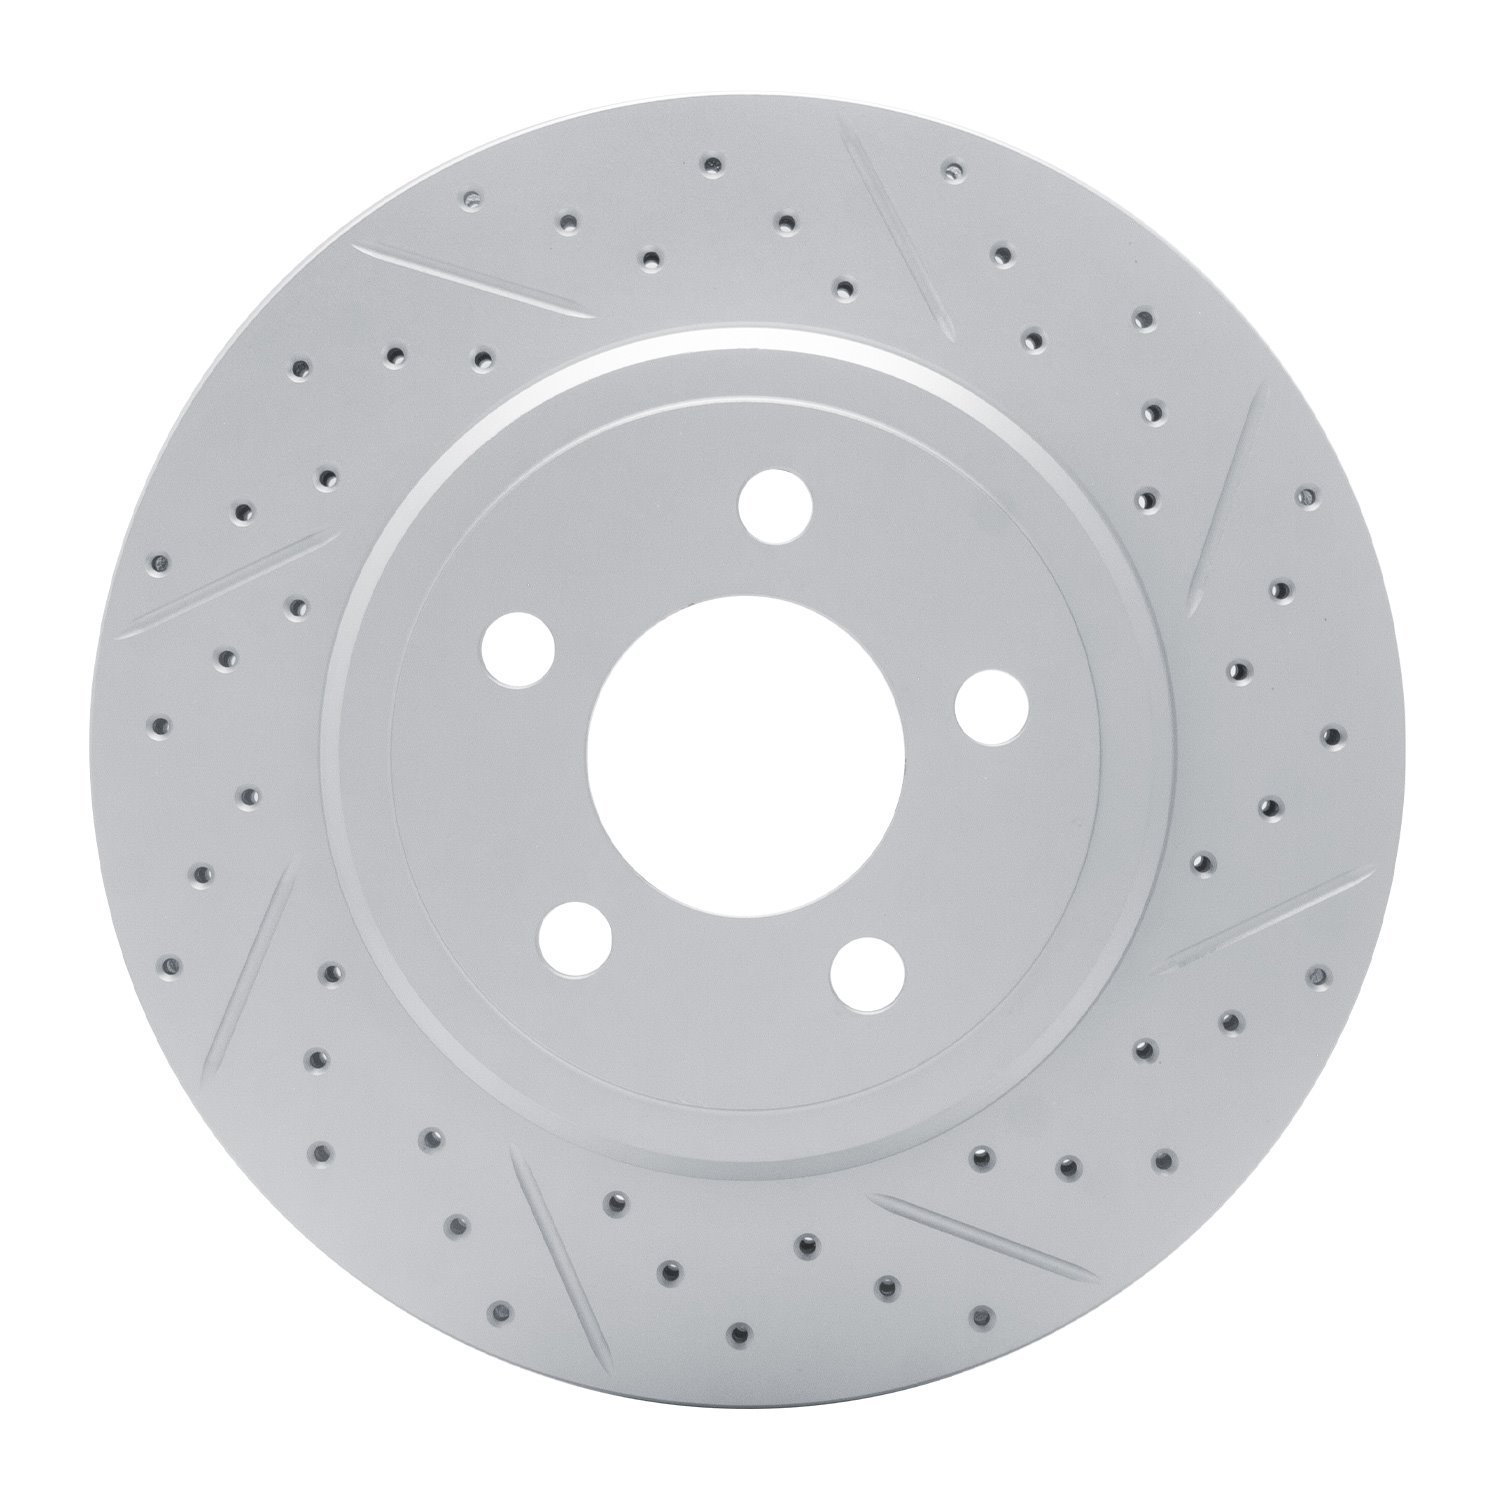 830-39018R Geoperformance Drilled/Slotted Brake Rotor, Fits Select Mopar, Position: Rear Right